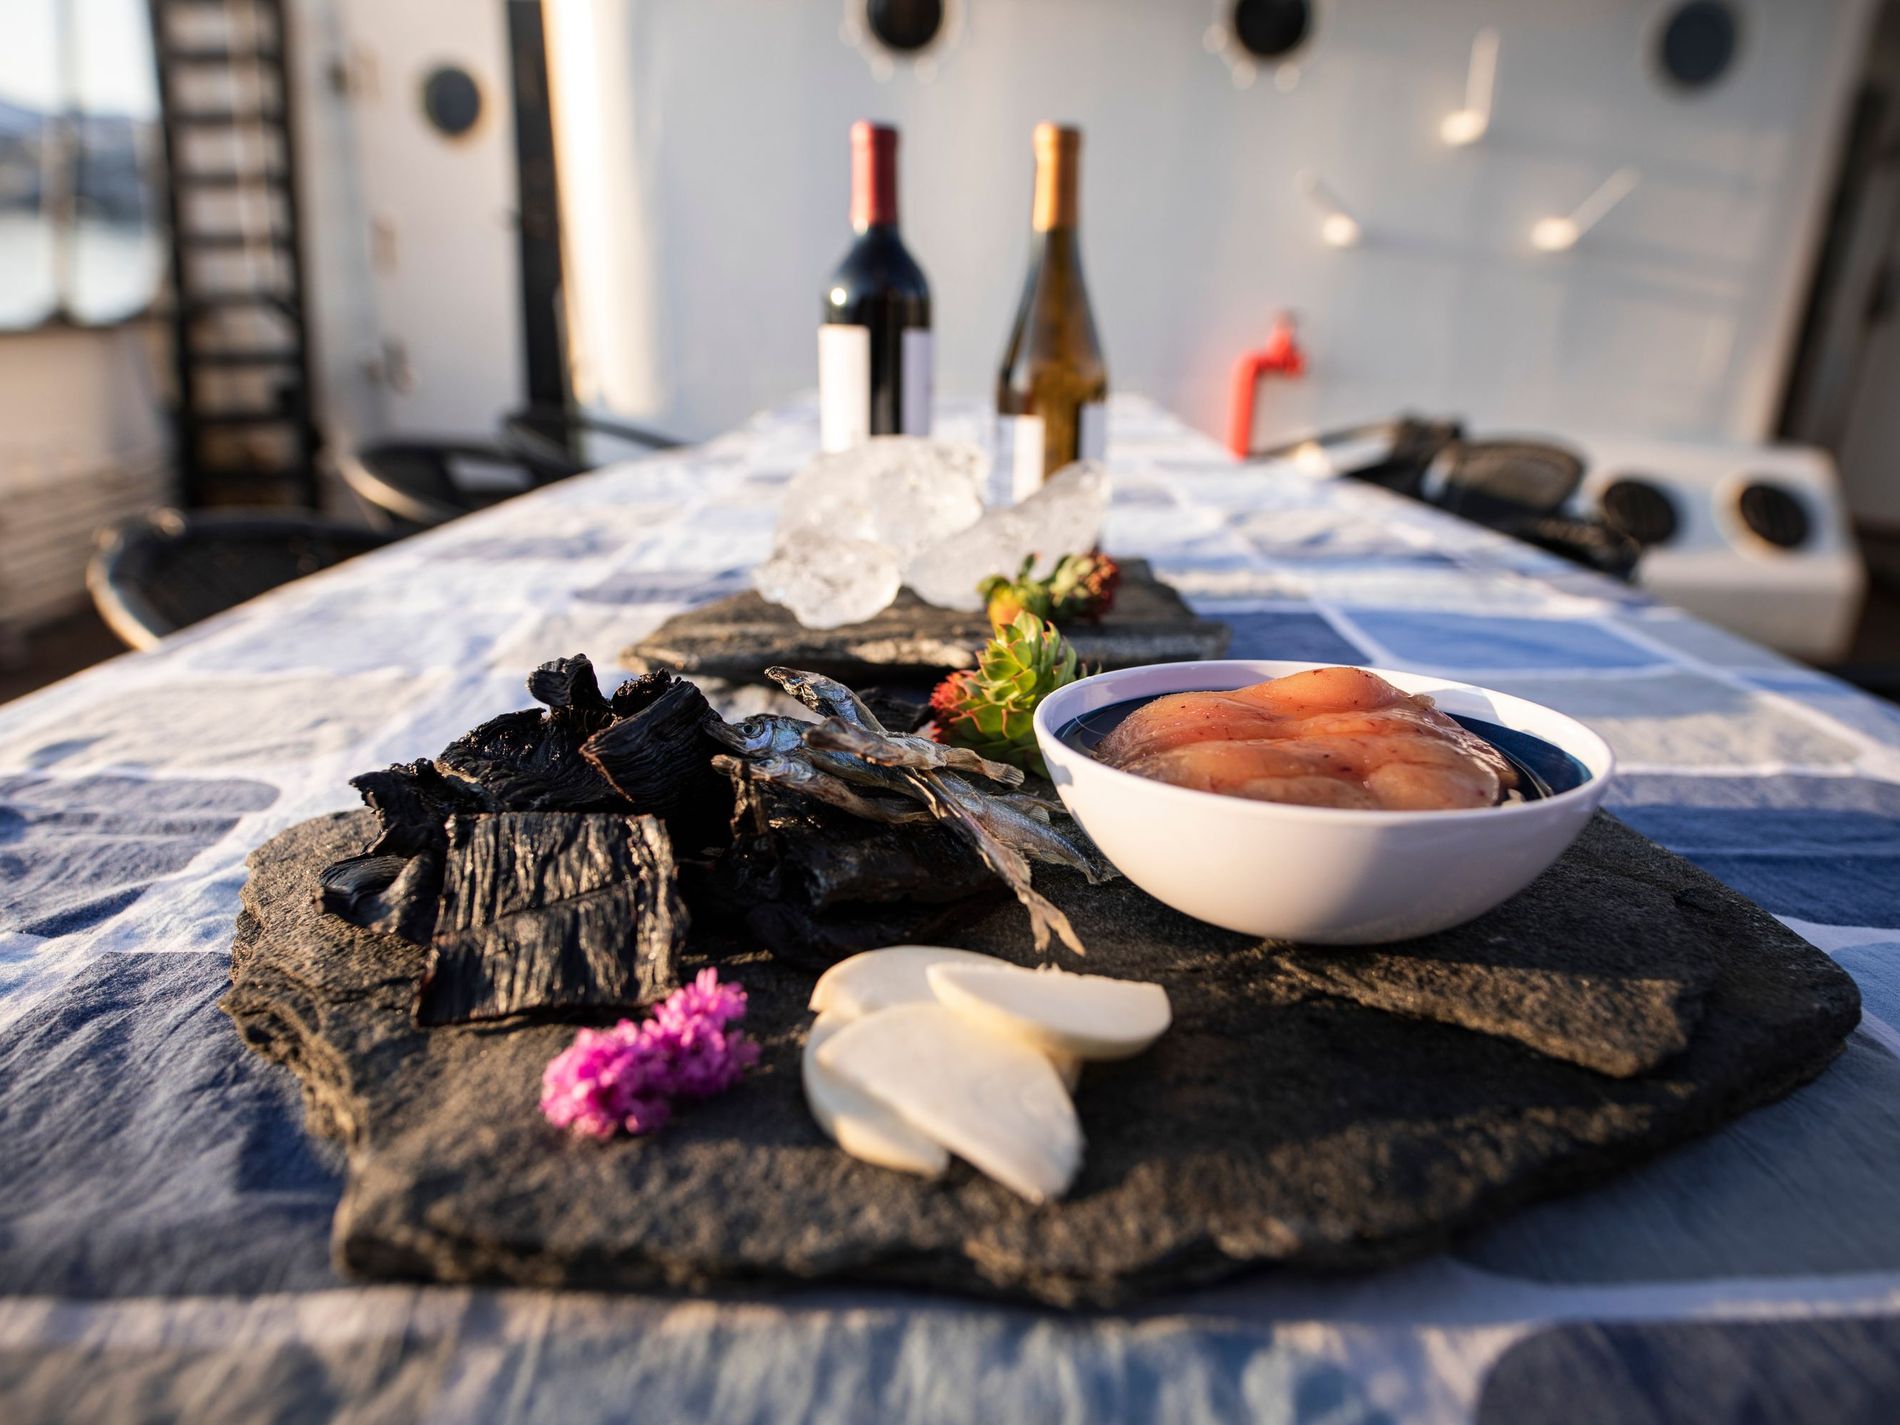 South Greenlandic soul food with fish and wine arranged on a table in the sunshine